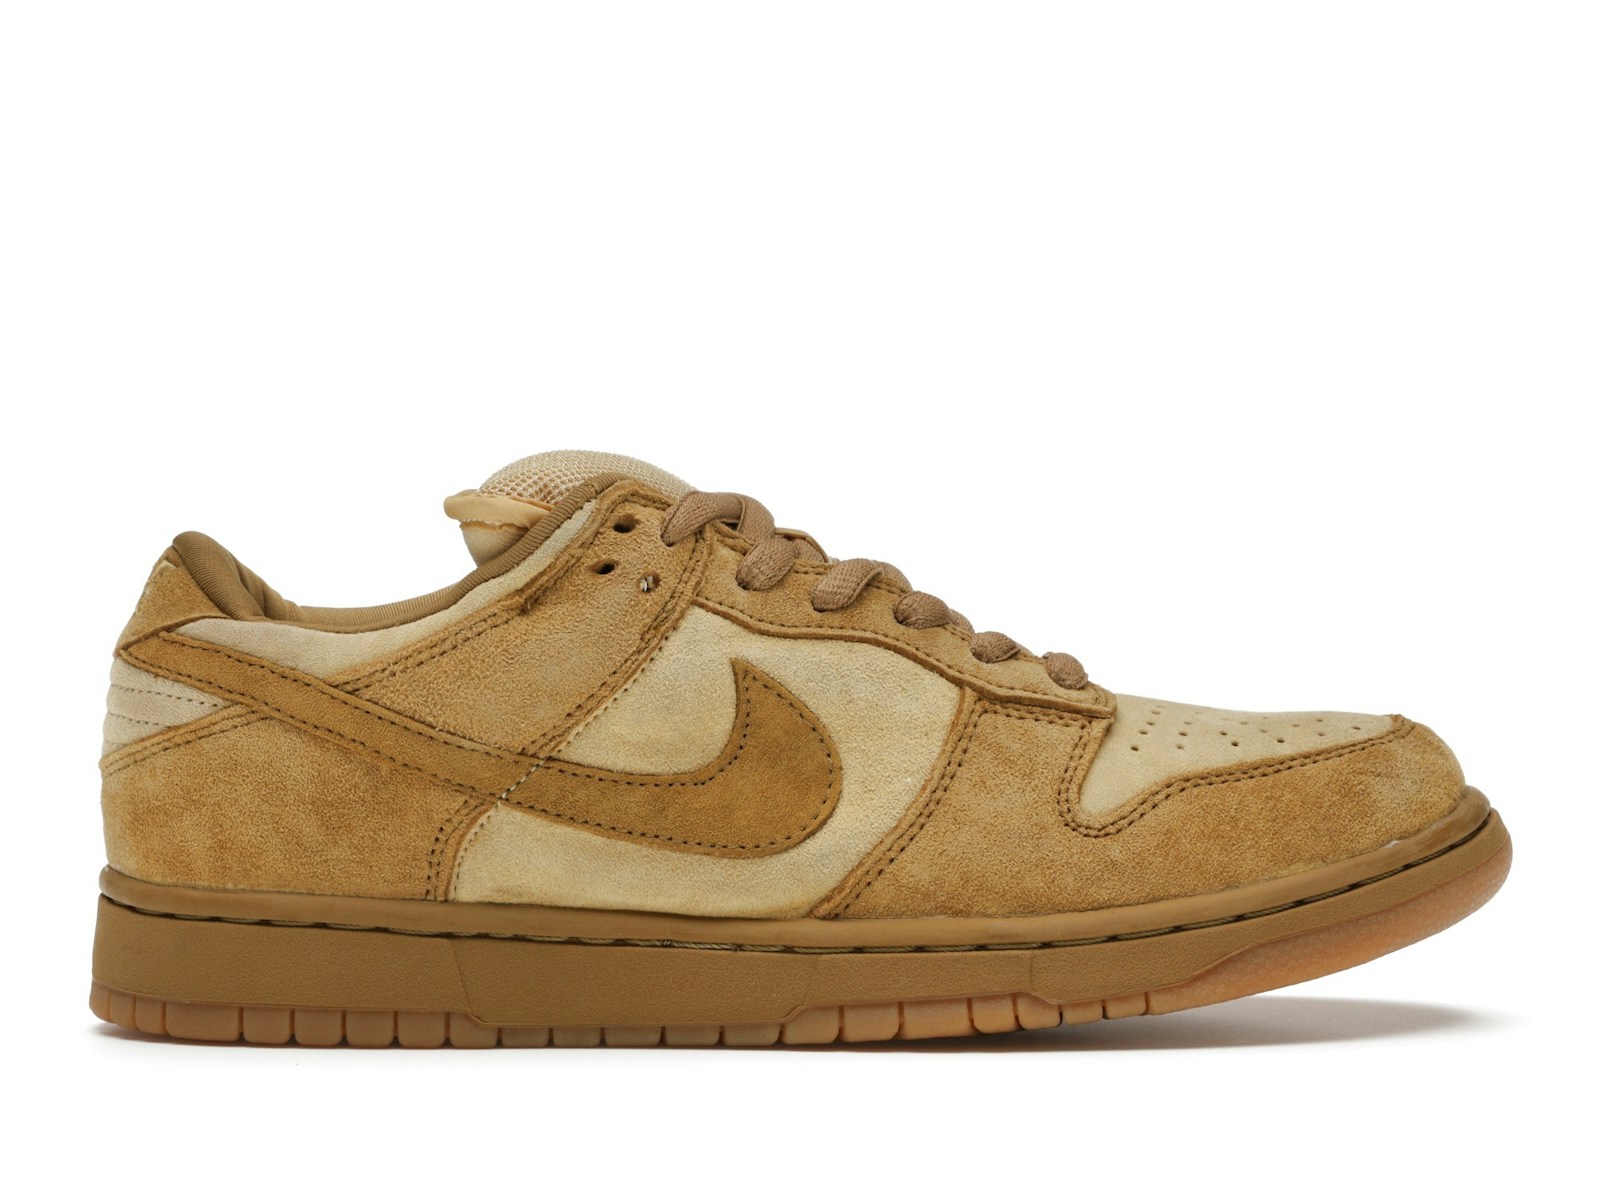 Nike SB Dunk Low Reese Forbes Wheat - 304292-731